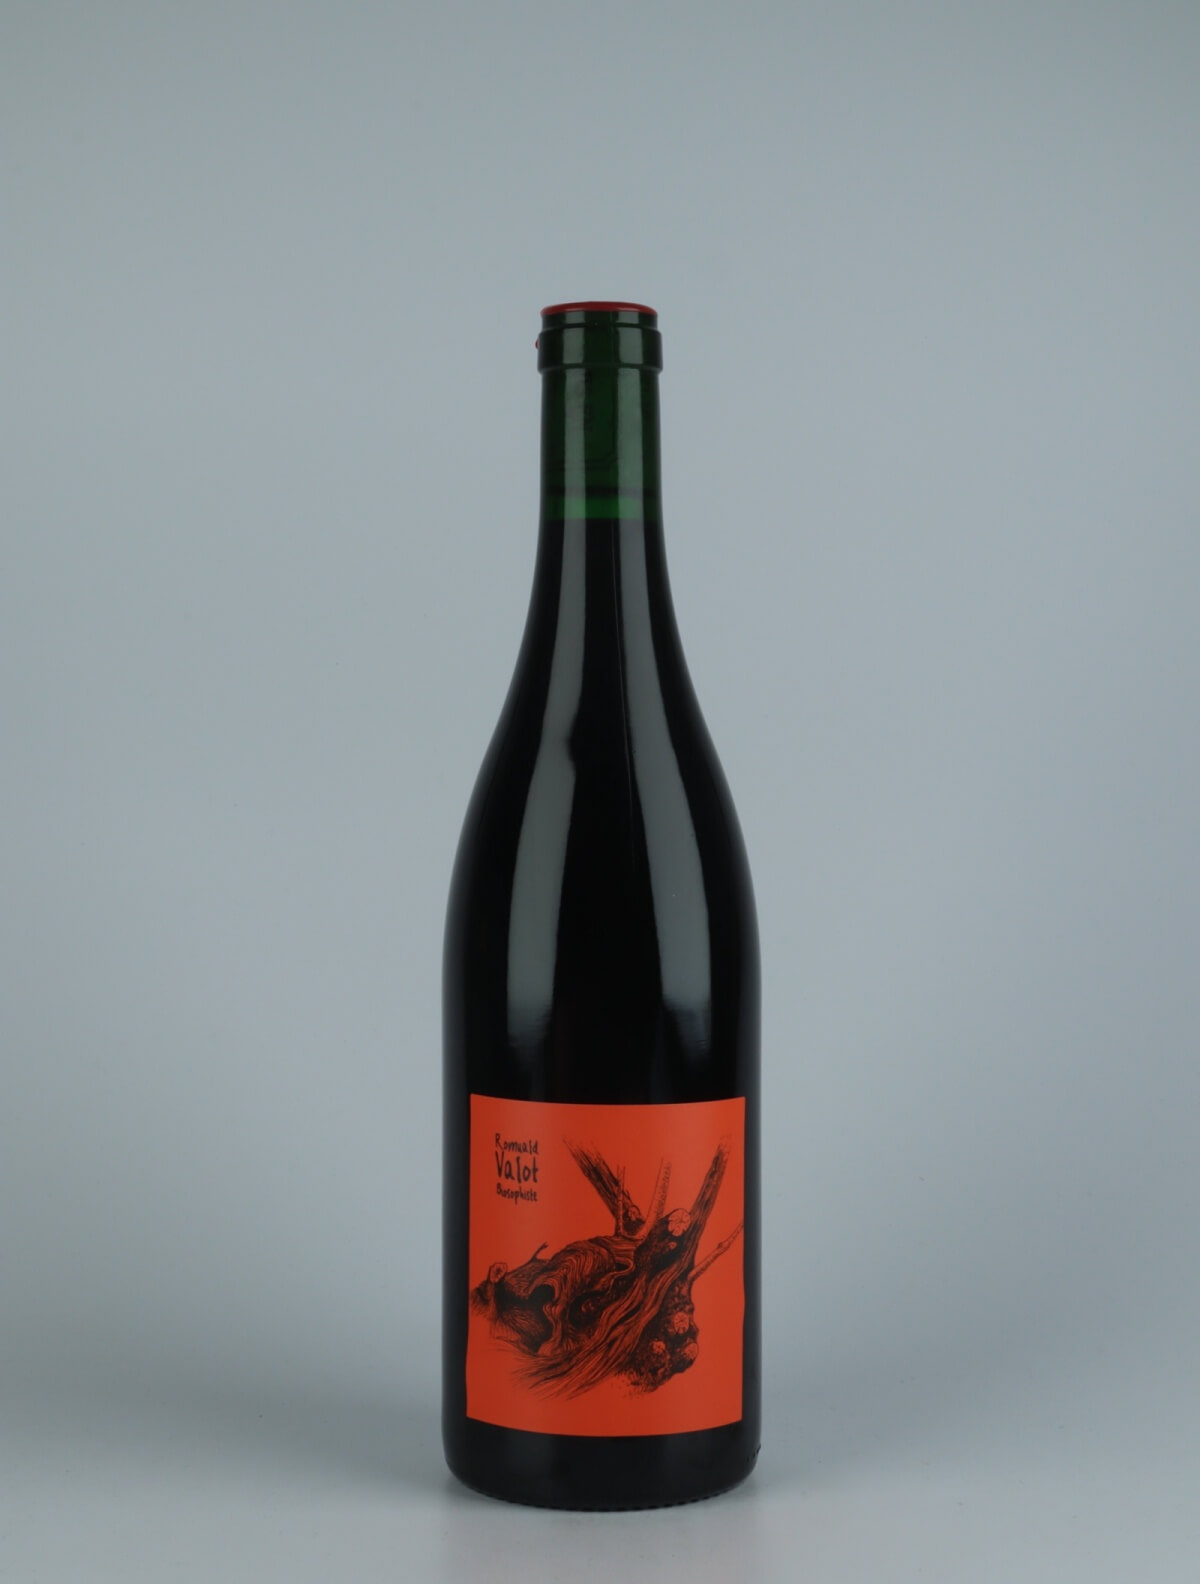 A bottle 2020 Chénas Red wine from Romuald Valot, Beaujolais in France